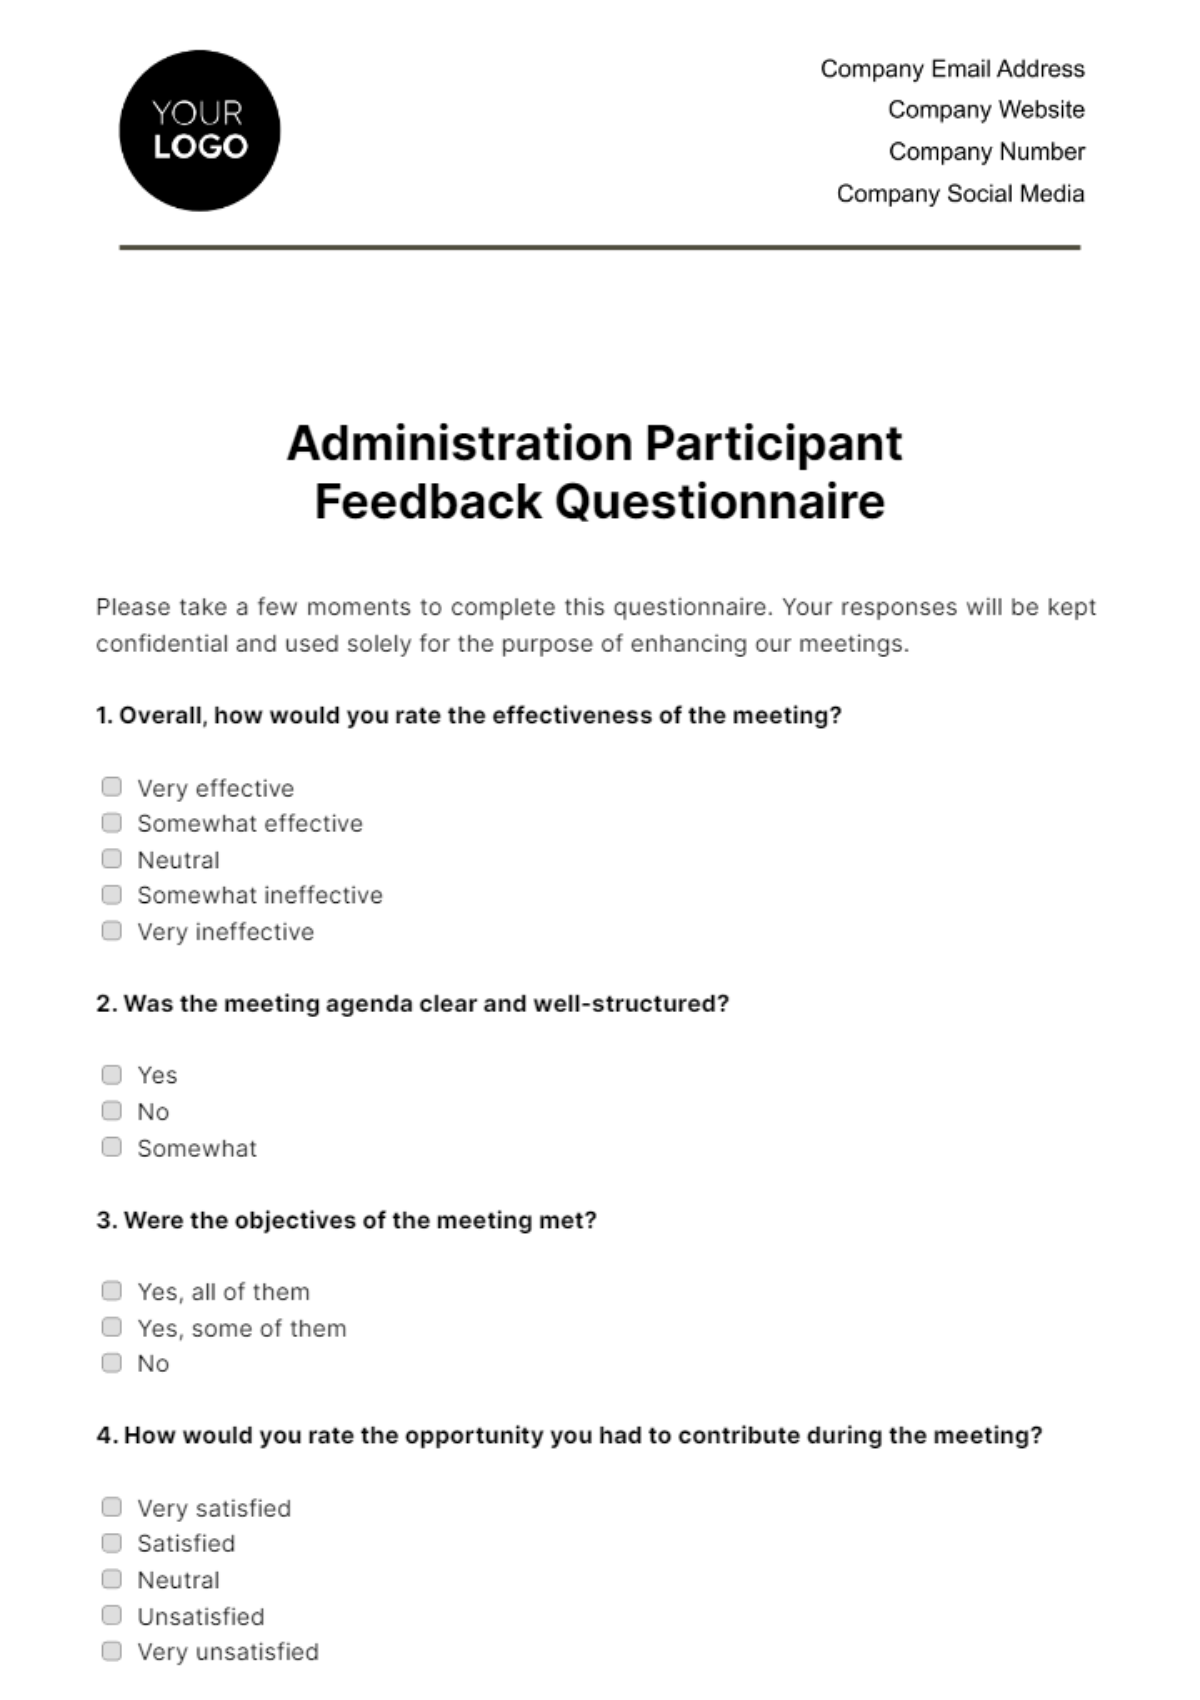 Free Administration Participant Feedback Questionnaire Template